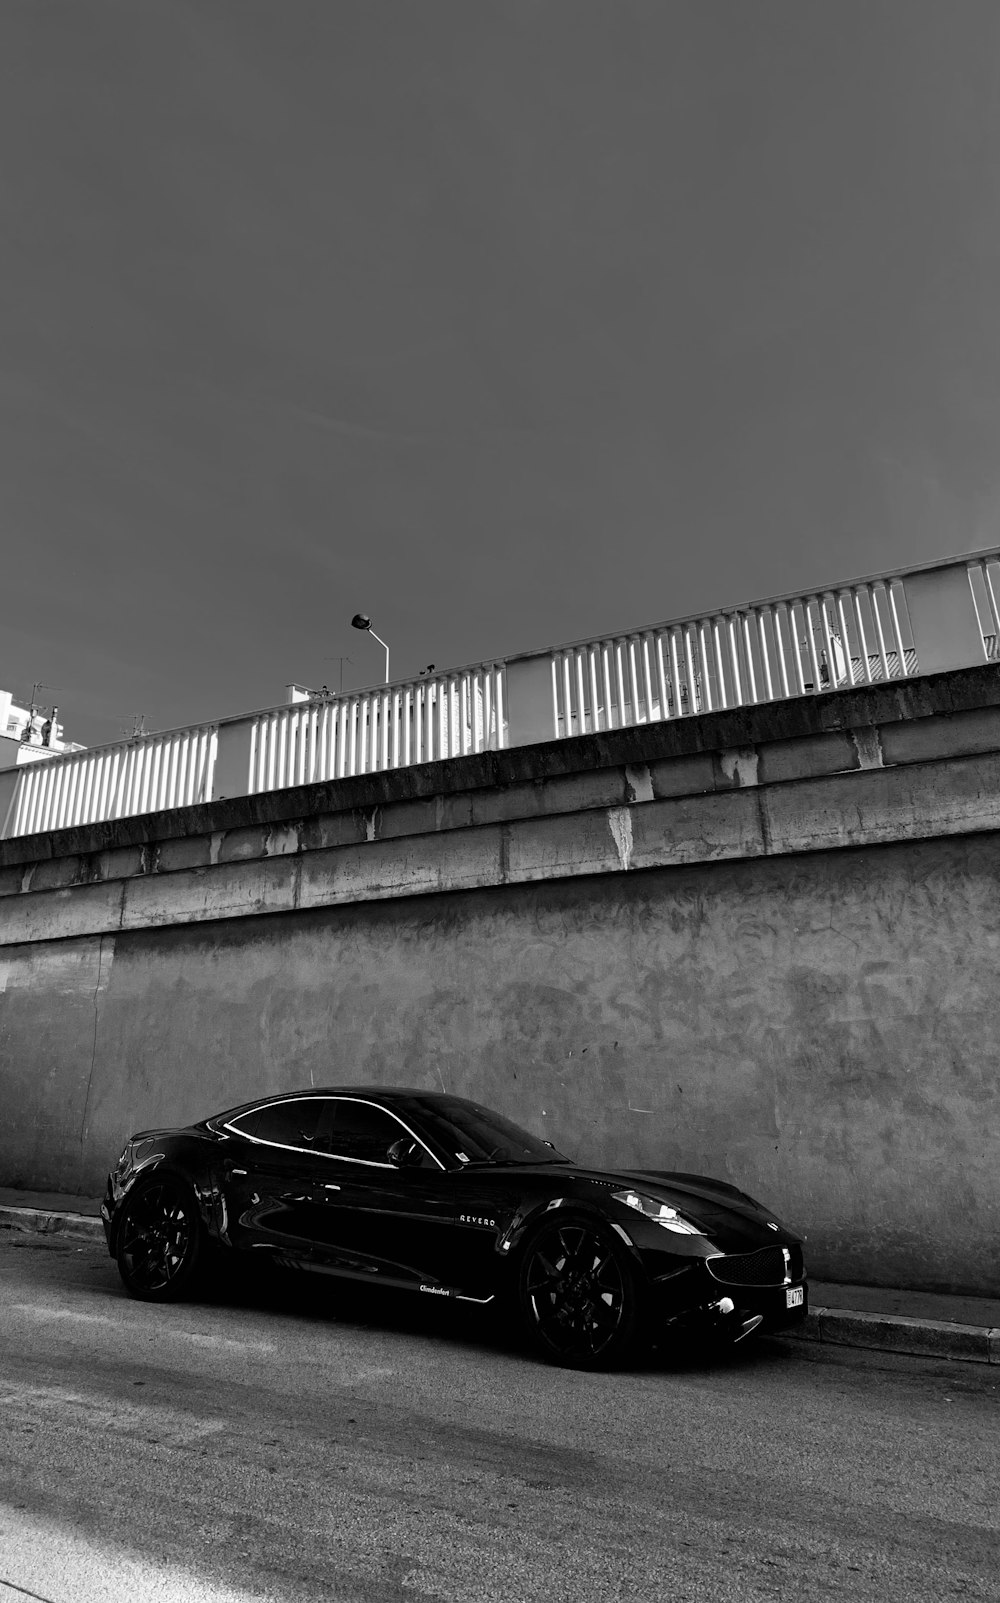 a black sports car parked on a road by a bridge